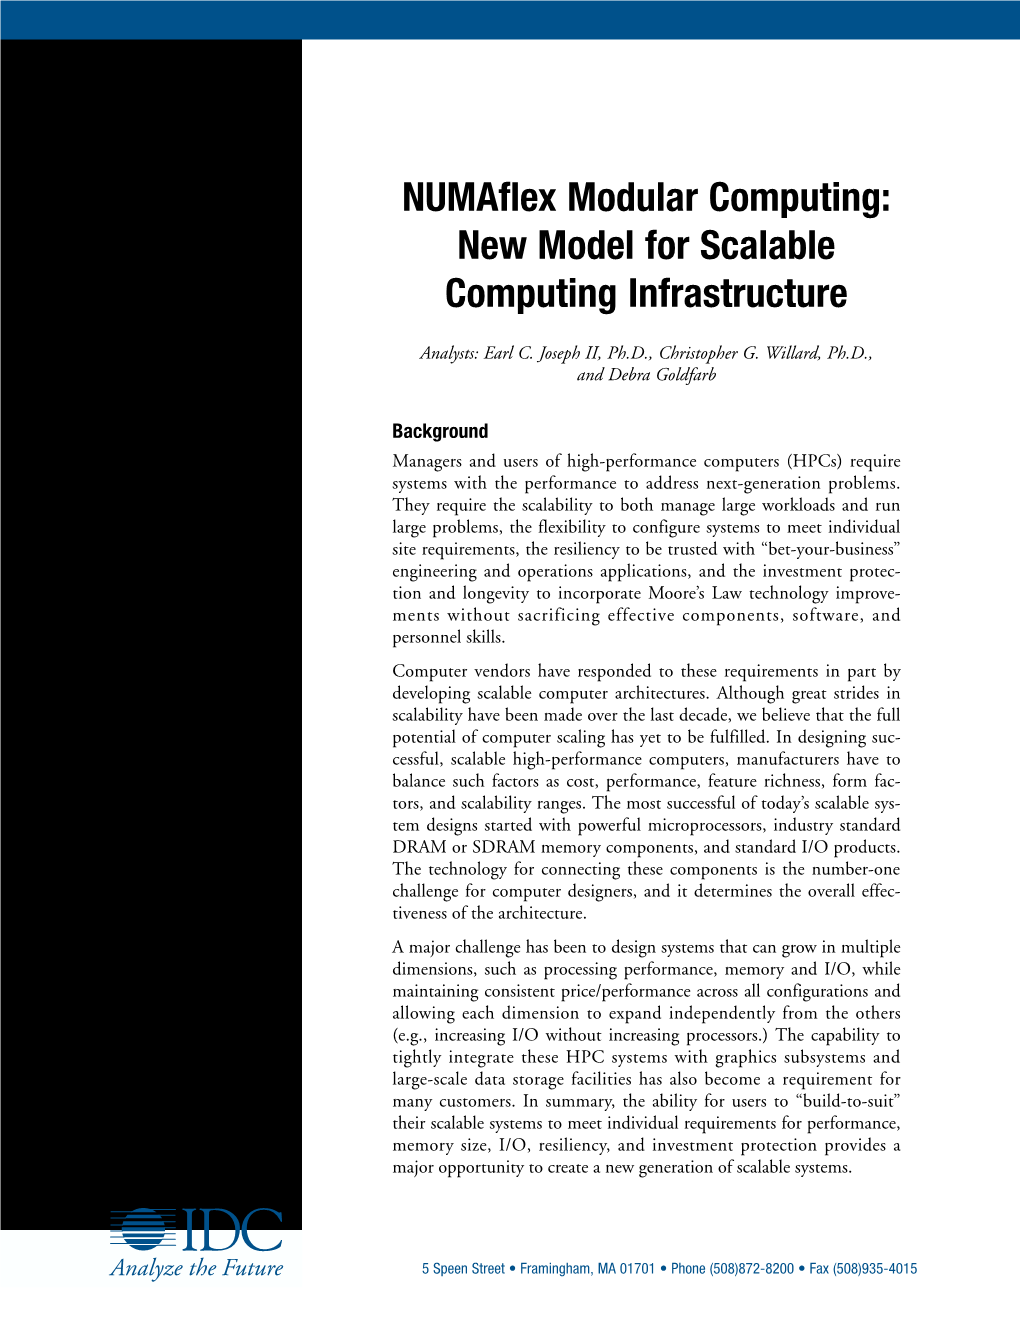 Numaflex Modular Computing: New Model for Scalable Computing Infrastructure